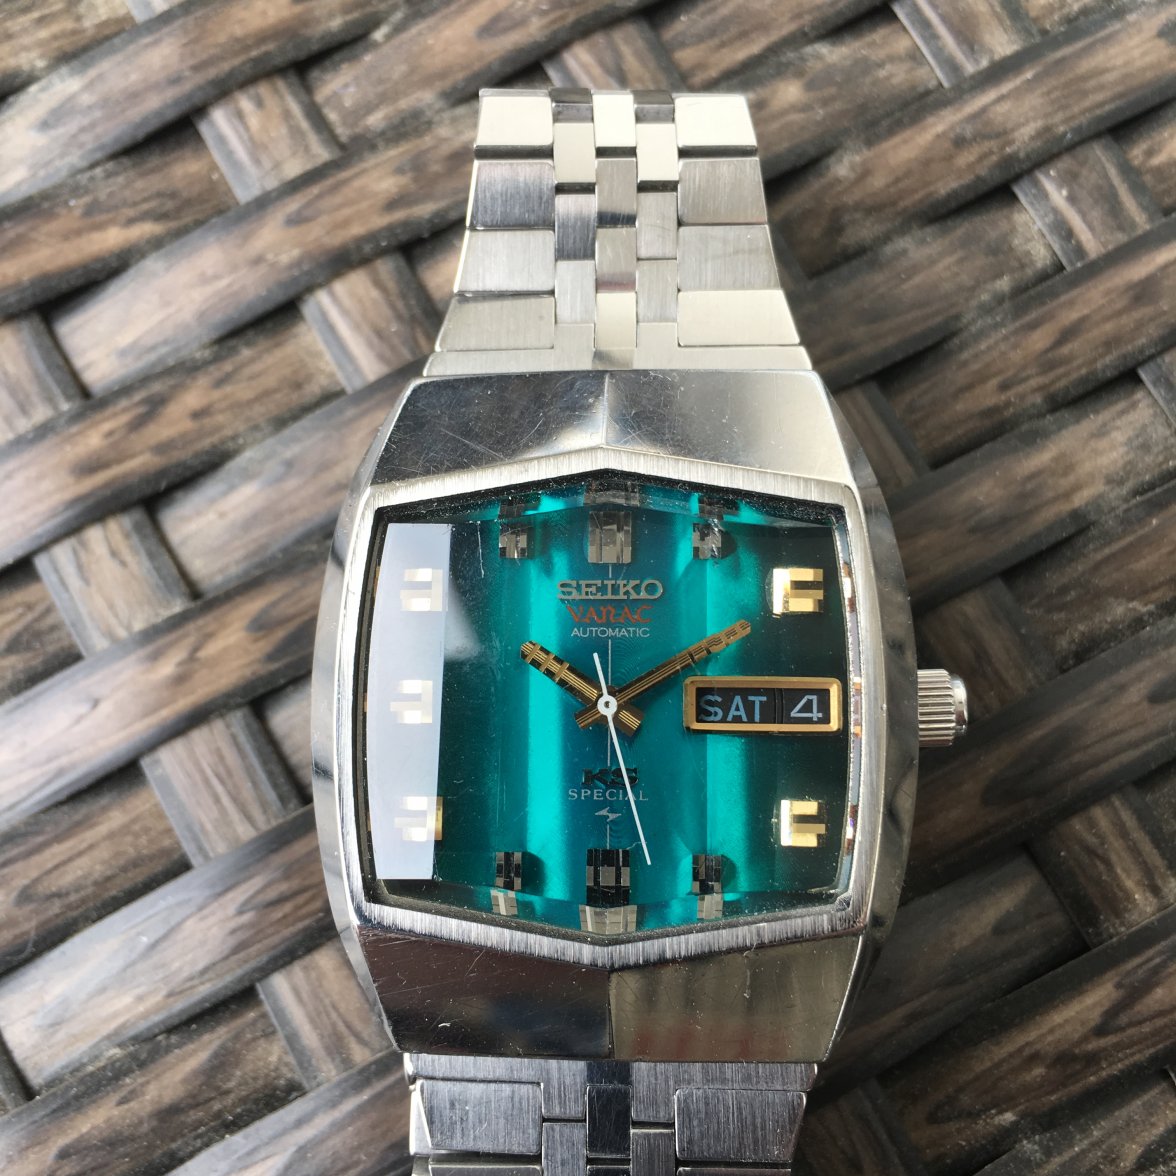 SOLD - 1974 King Seiko Vanac Special | Omega Forums